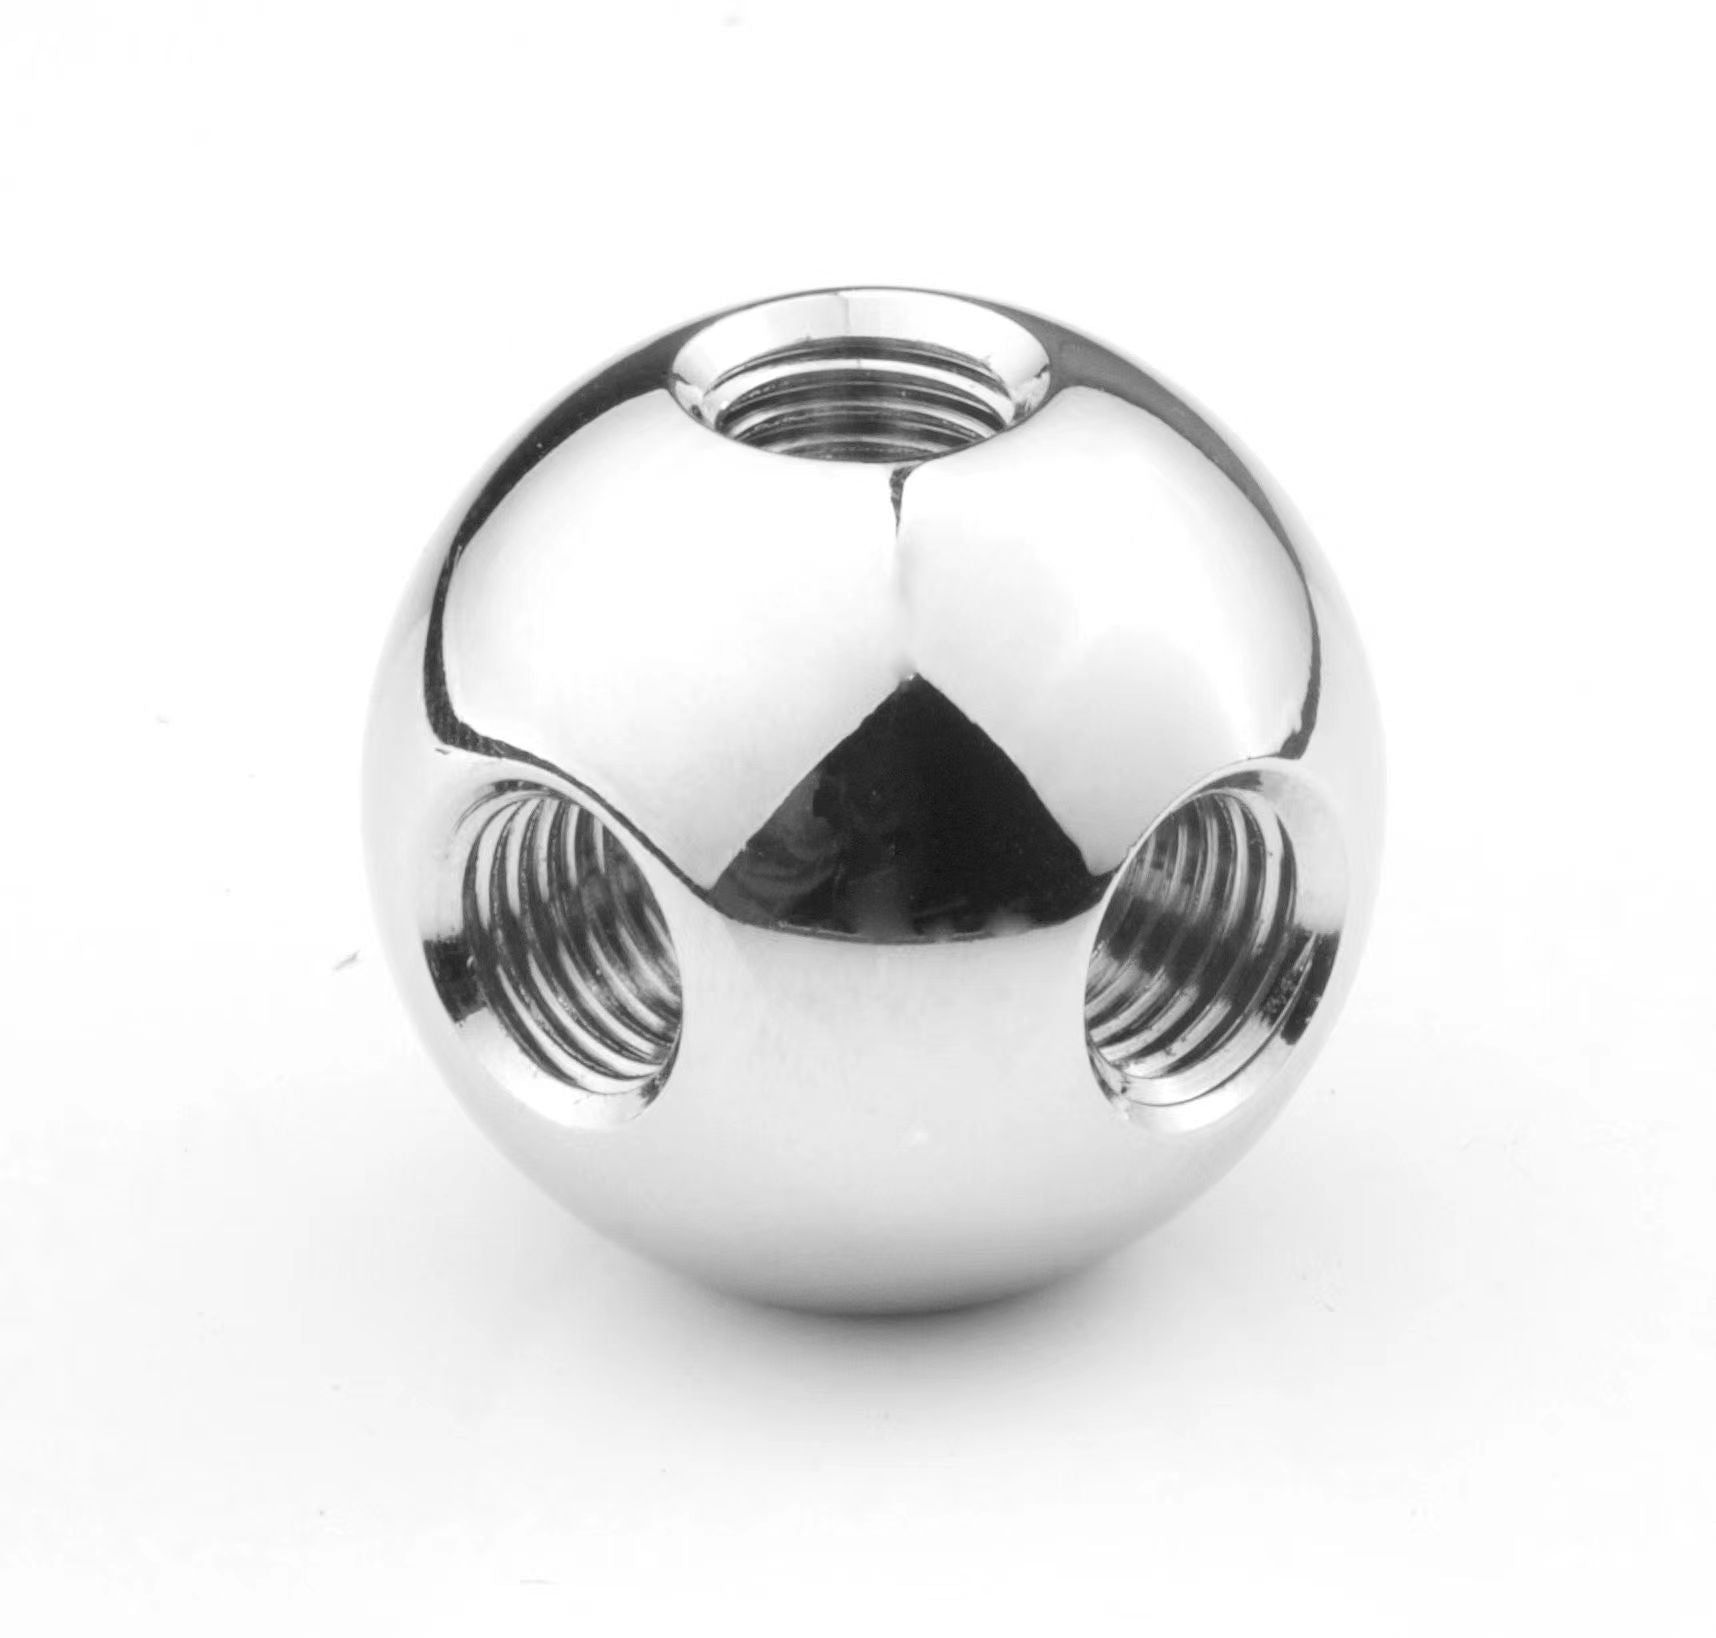 USM Haller Ball Replacement Sphere